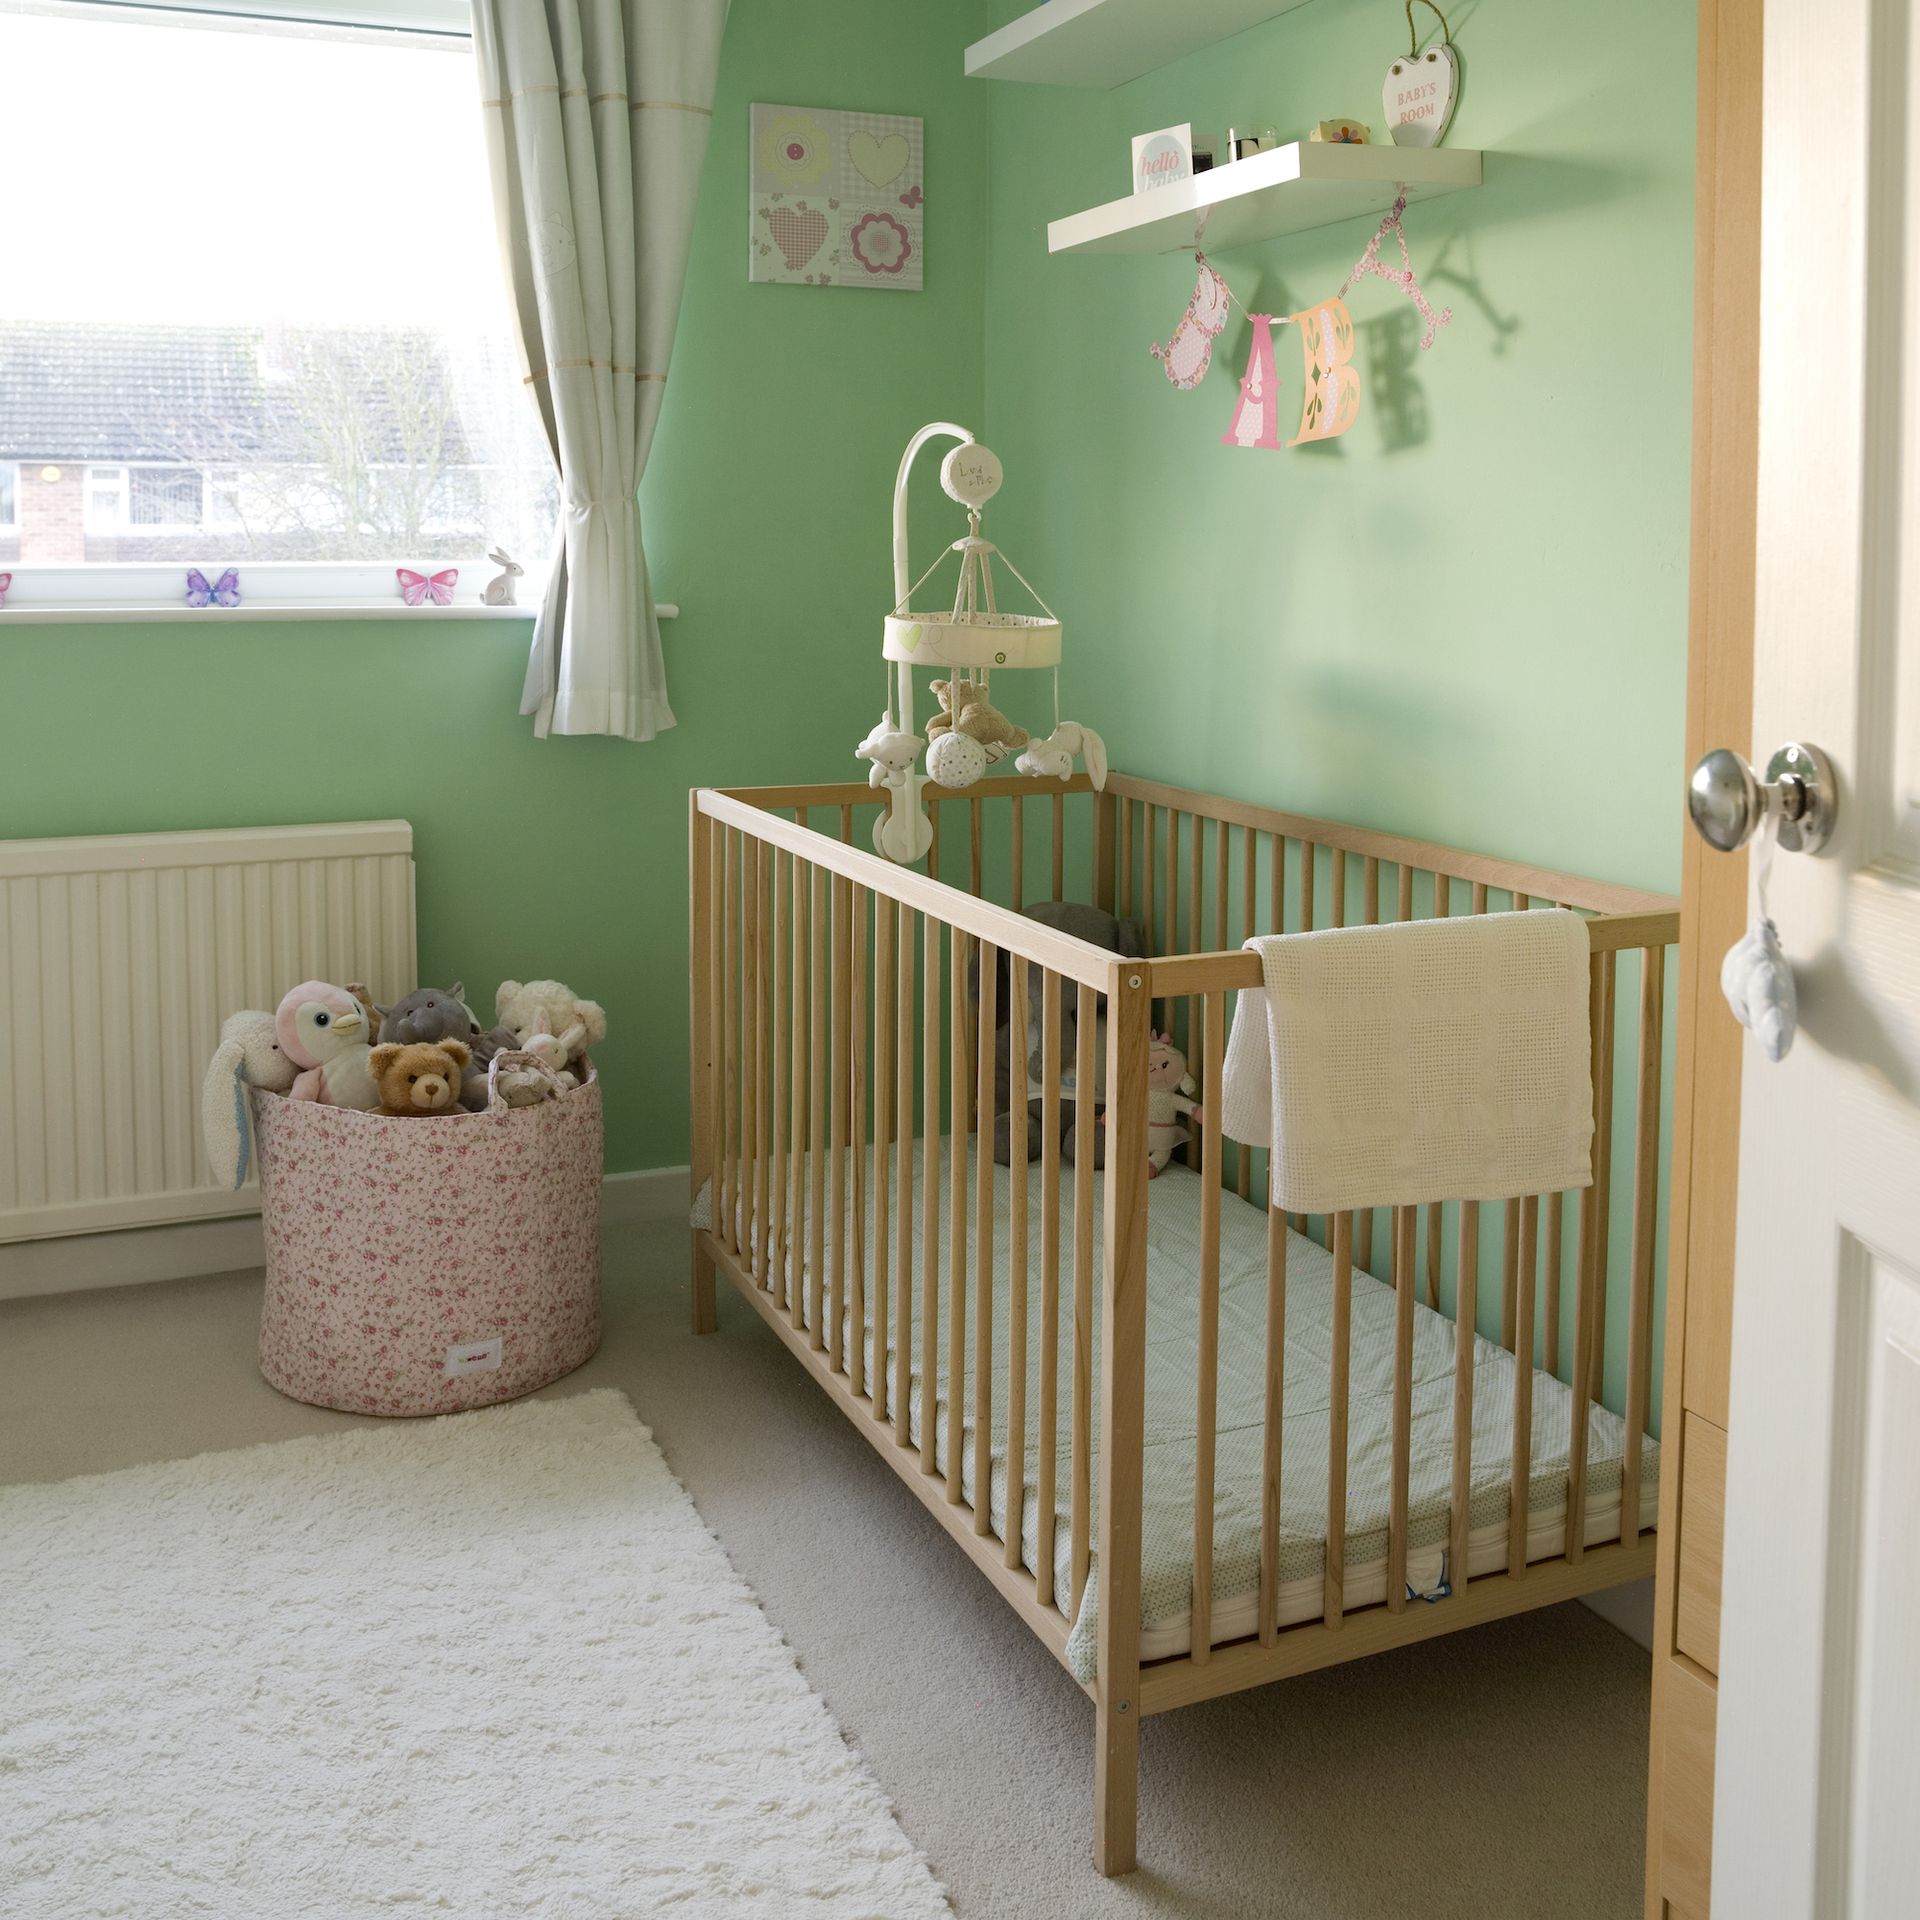 <p>                     Colour influences our mood and there is research to suggest it may affect a baby's mood too. So choose a soothing shade, such as sage green nurseries.                   </p>                                      <p>                     'Green has a powerful calming effect, and it signifies growth,' says interiors stylist Aaron Markwell at COAT Paints. 'The obvious link with the outdoors and nature connection brings balance to the feel of a nursery.'                   </p>